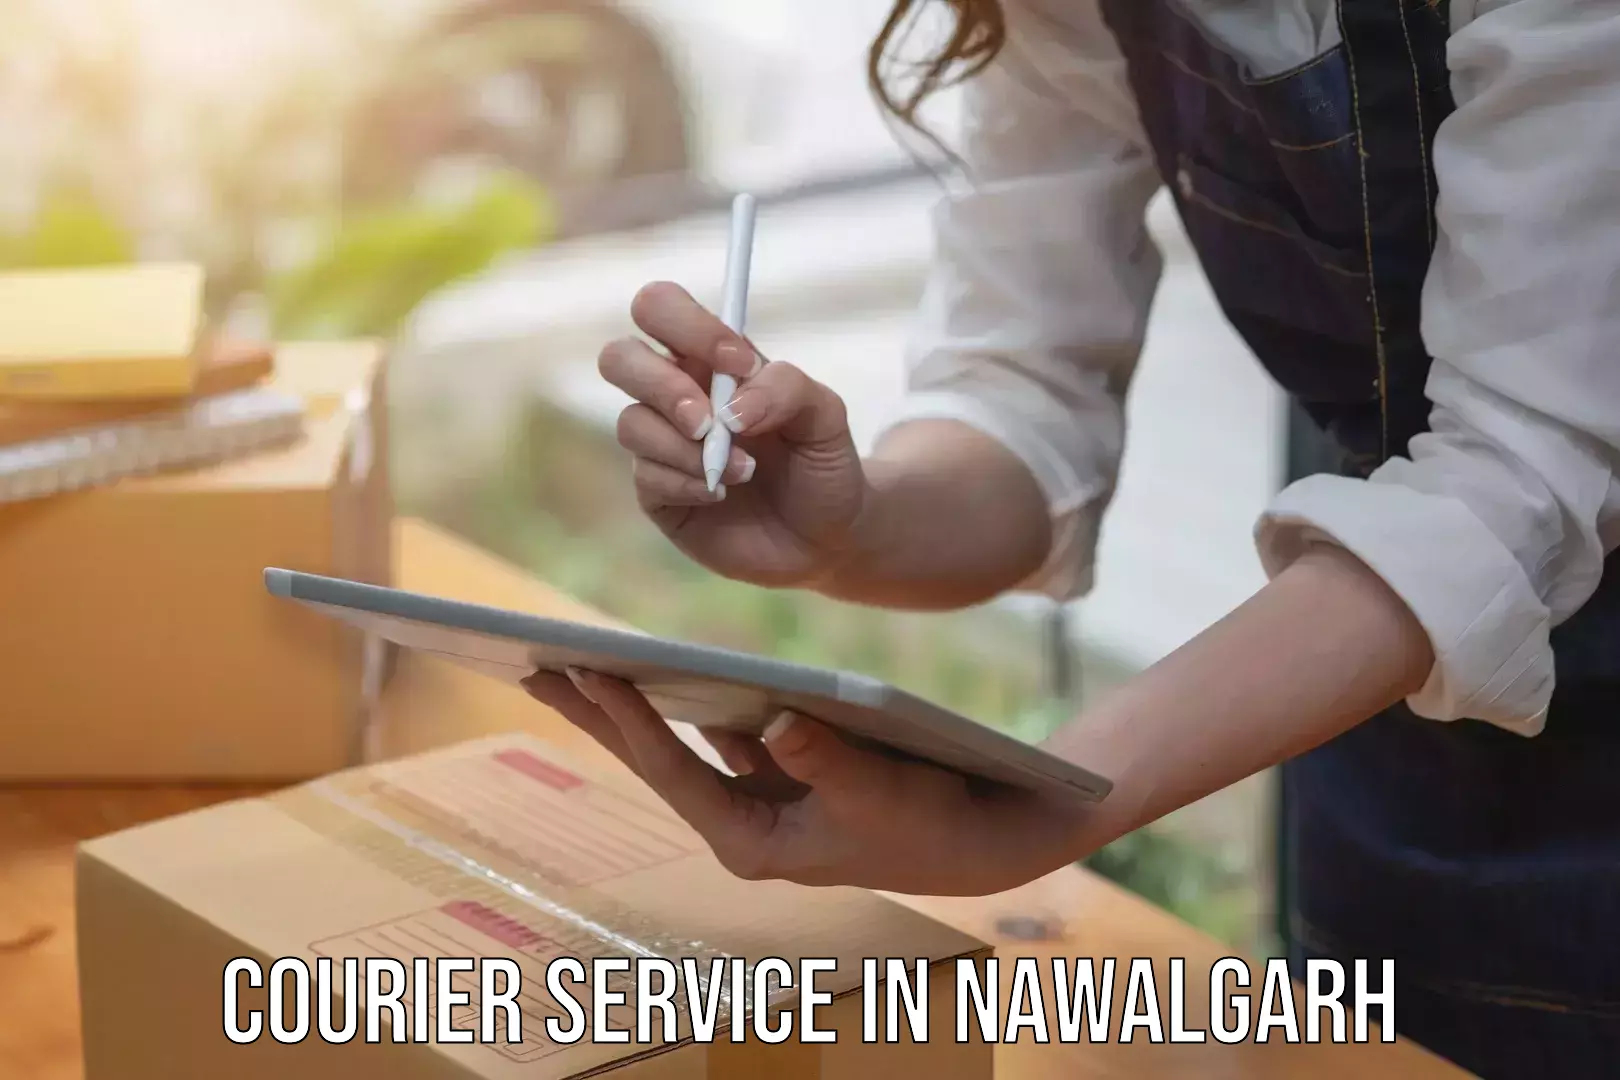 Streamlined delivery processes in Nawalgarh